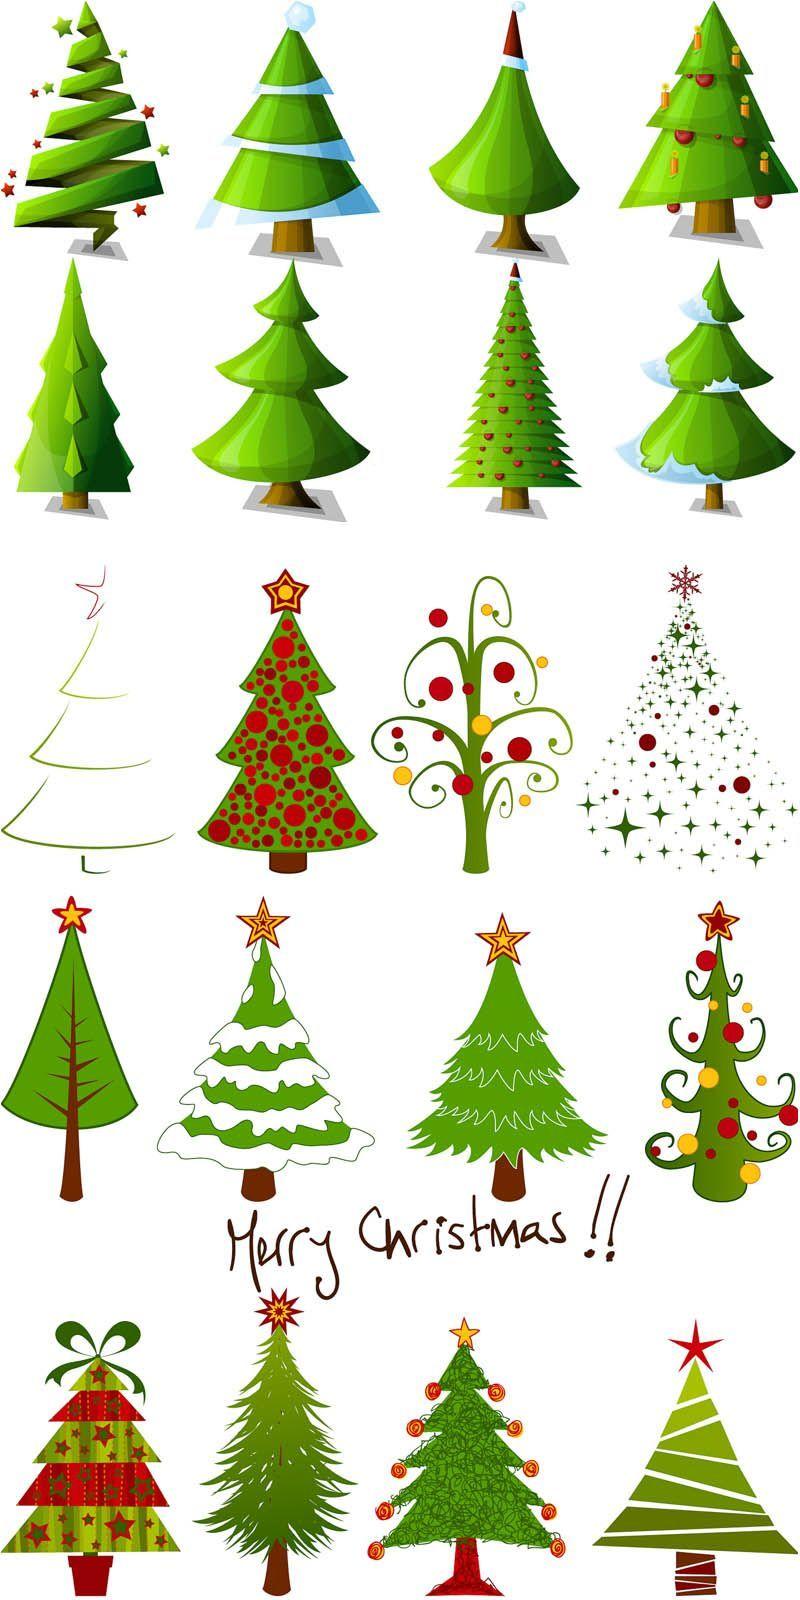 Christmas Tree Logo - Sets of 20 vector cartoon Christmas tree designs in different